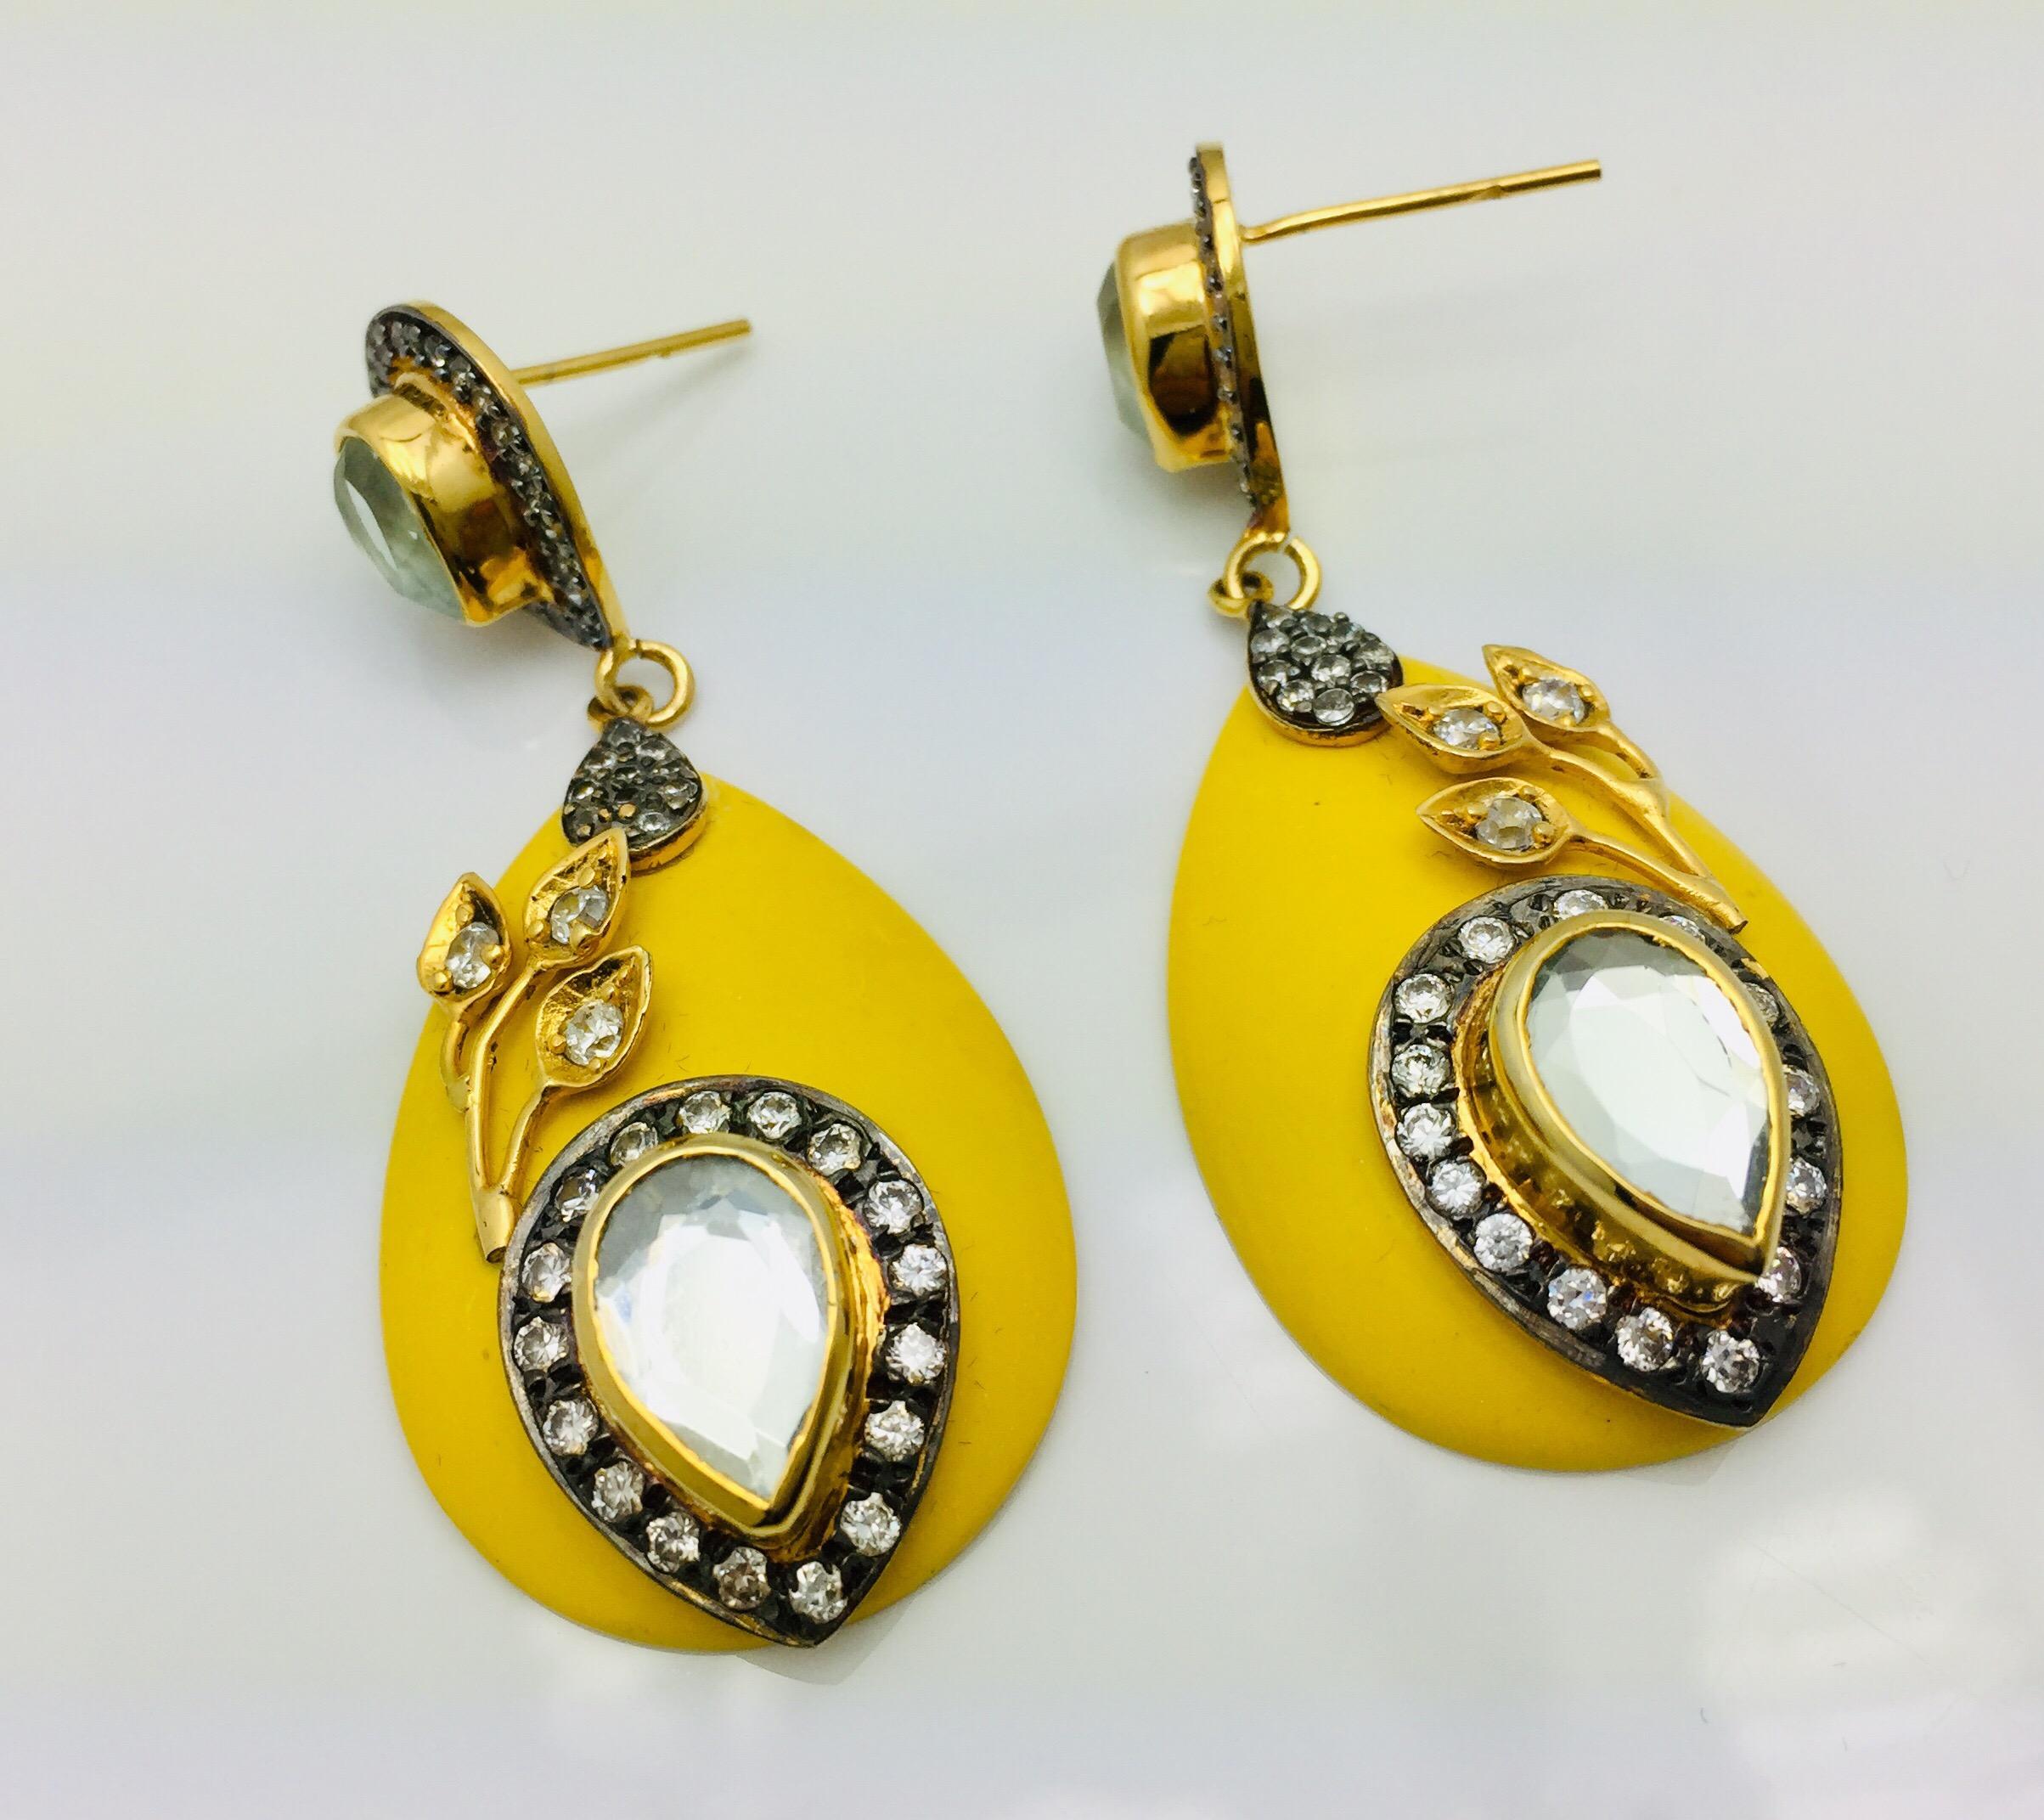 Strut your stuff in these yellow resin leaf earrings. As you can see, the novel creation features a standout design that incorporates some super stylish elements. These earrings fasten with post back closures for pierced ears.  Only 1